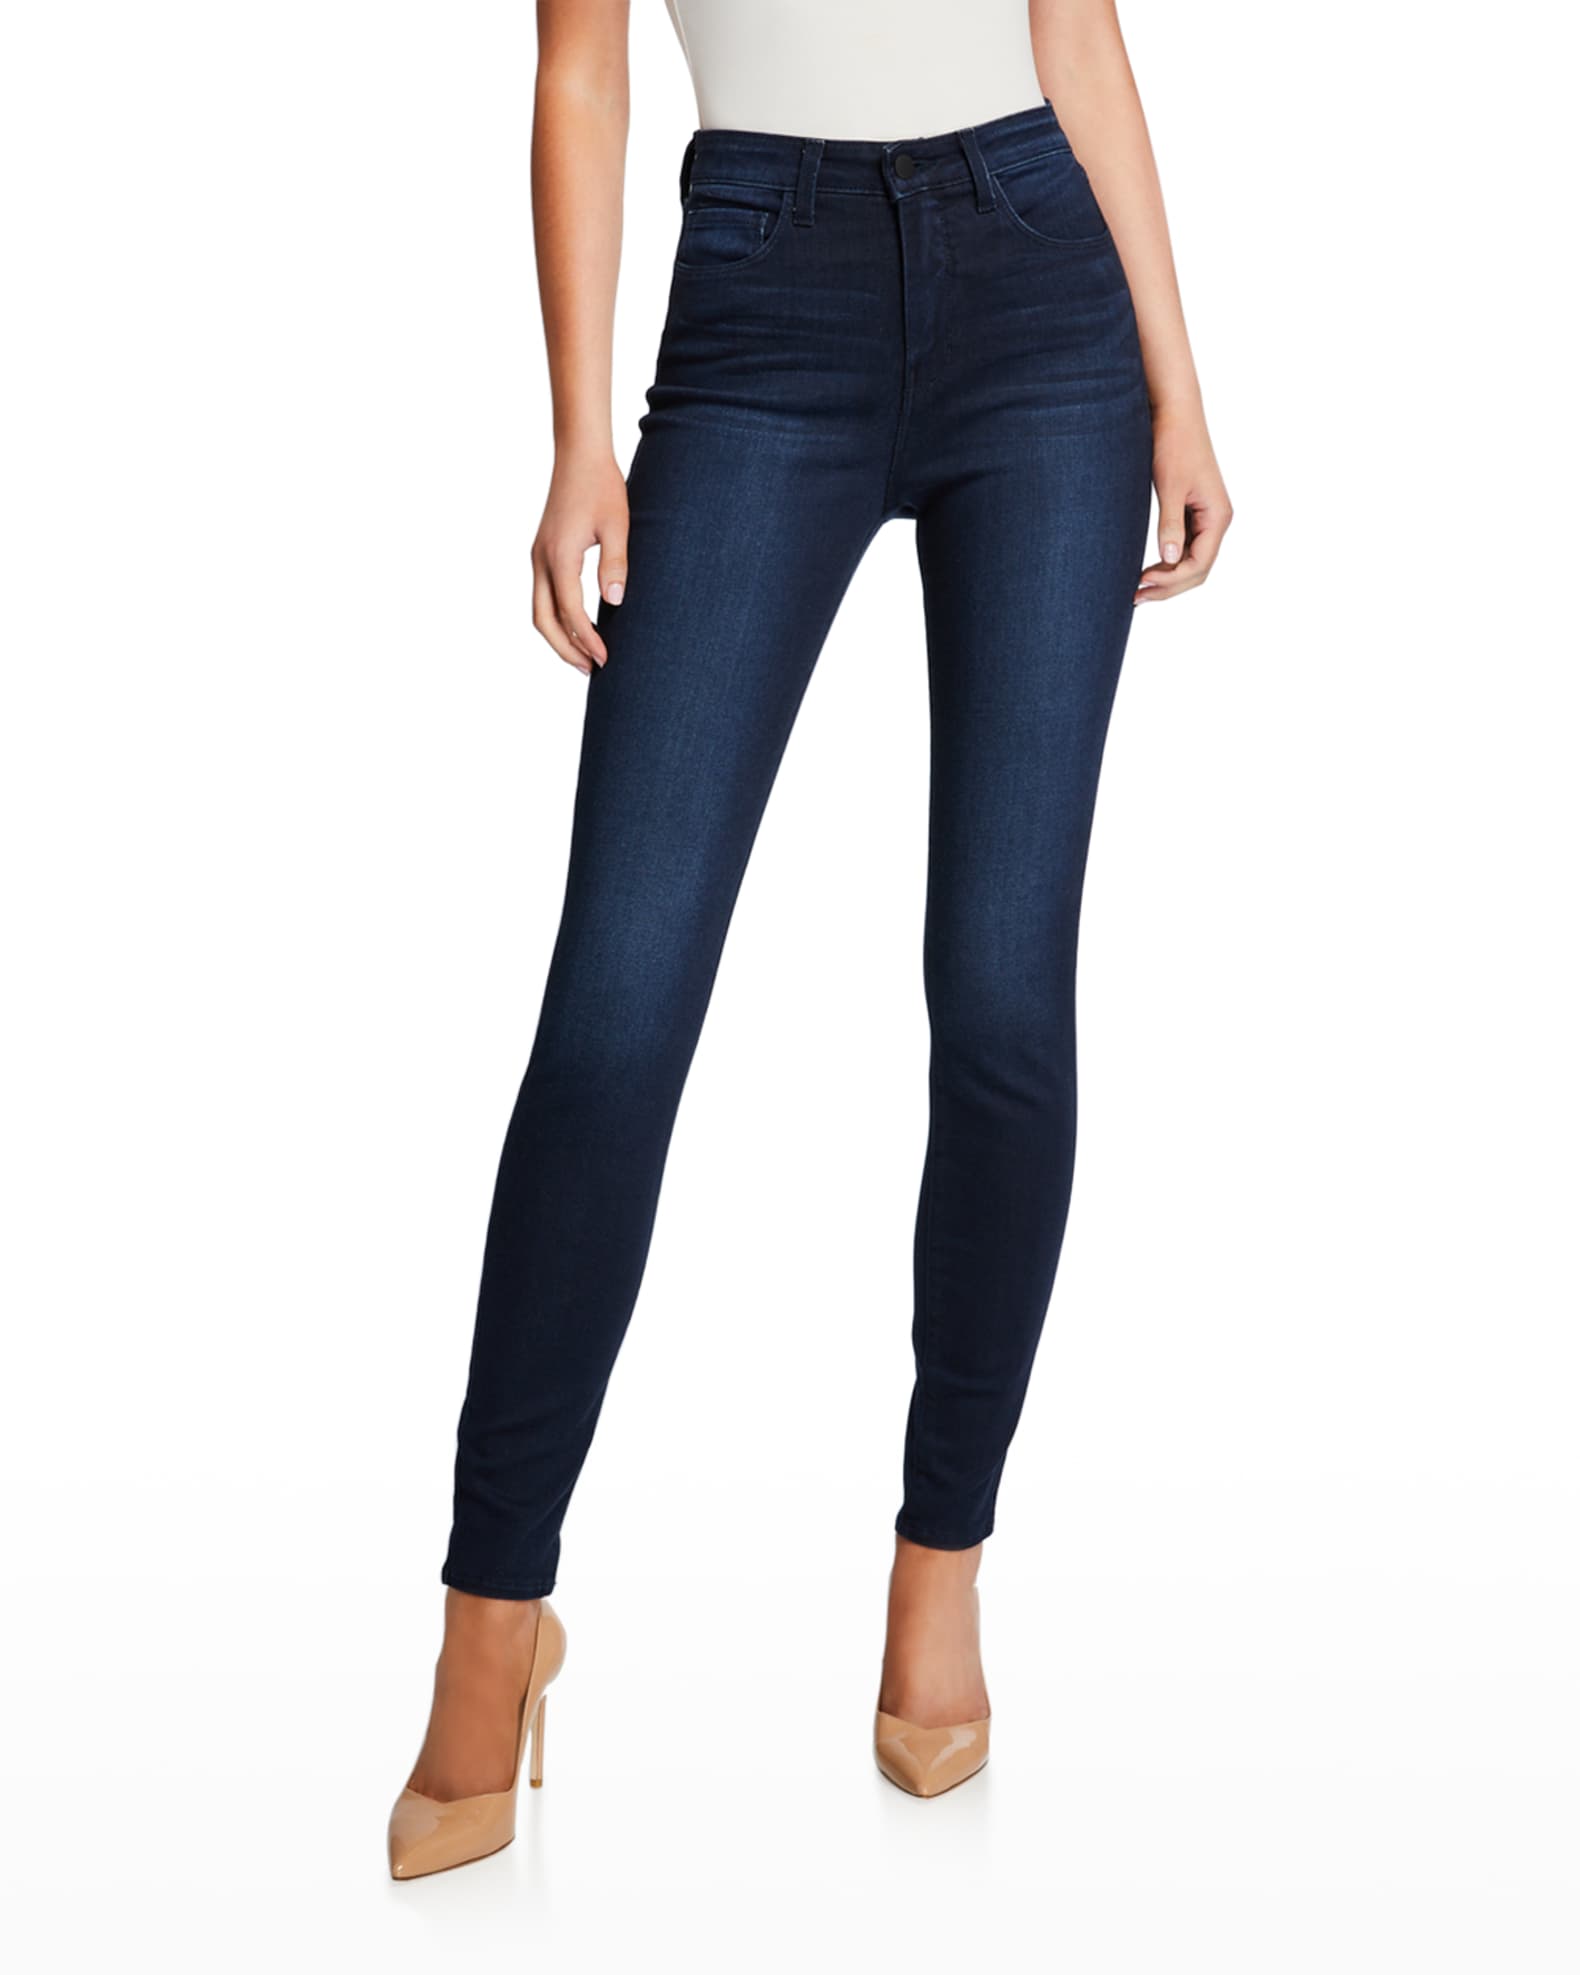 L'Agence Marguerite High-Rise Ankle Skinny Jeans | Neiman Marcus